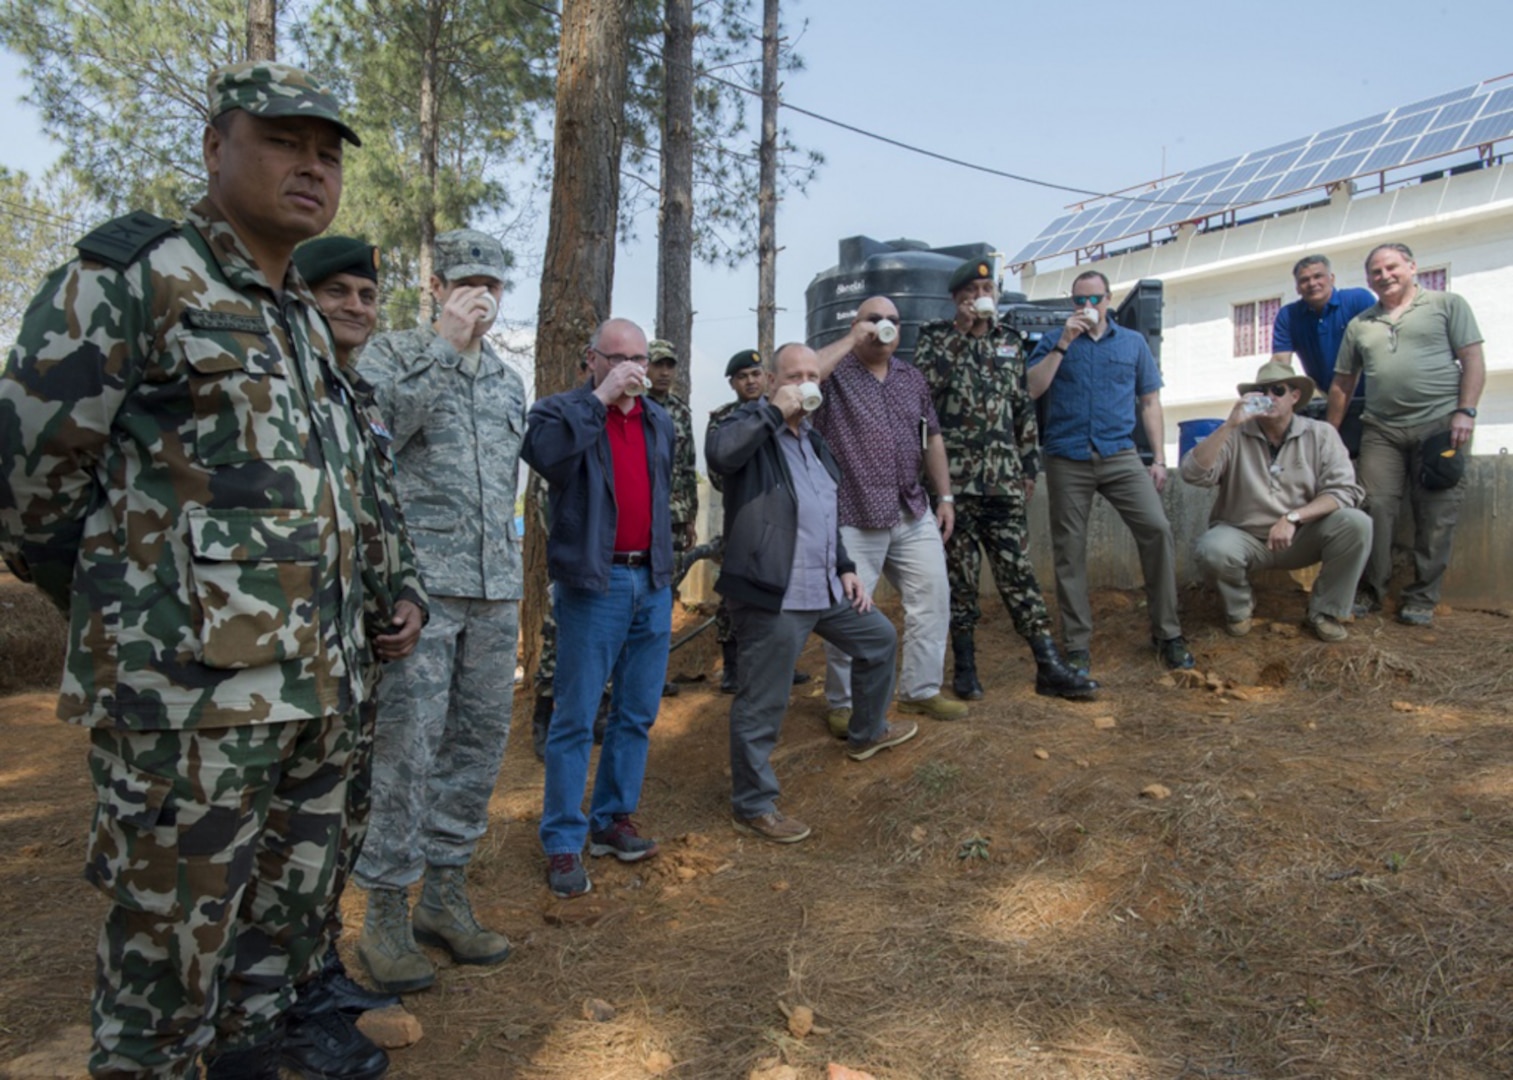 Personnel visiting Nepal’s Birendra Peace Operations Training Centre during Exercise Shanti Prayas III test drinking water purified from a water purification system installed as part of the Net Zero initiative Mar. 21, 2017. The Net Zero initiative, which focuses on power, water and waste remediation, is a pilot program which relies on the usage of solar power with minimum generator back up as an option to be more self-sufficient. With this initiative, the BPOTC, now armed with a water purification system using these energy options, can now produce nearly 5,000 gallons of clean water per day.